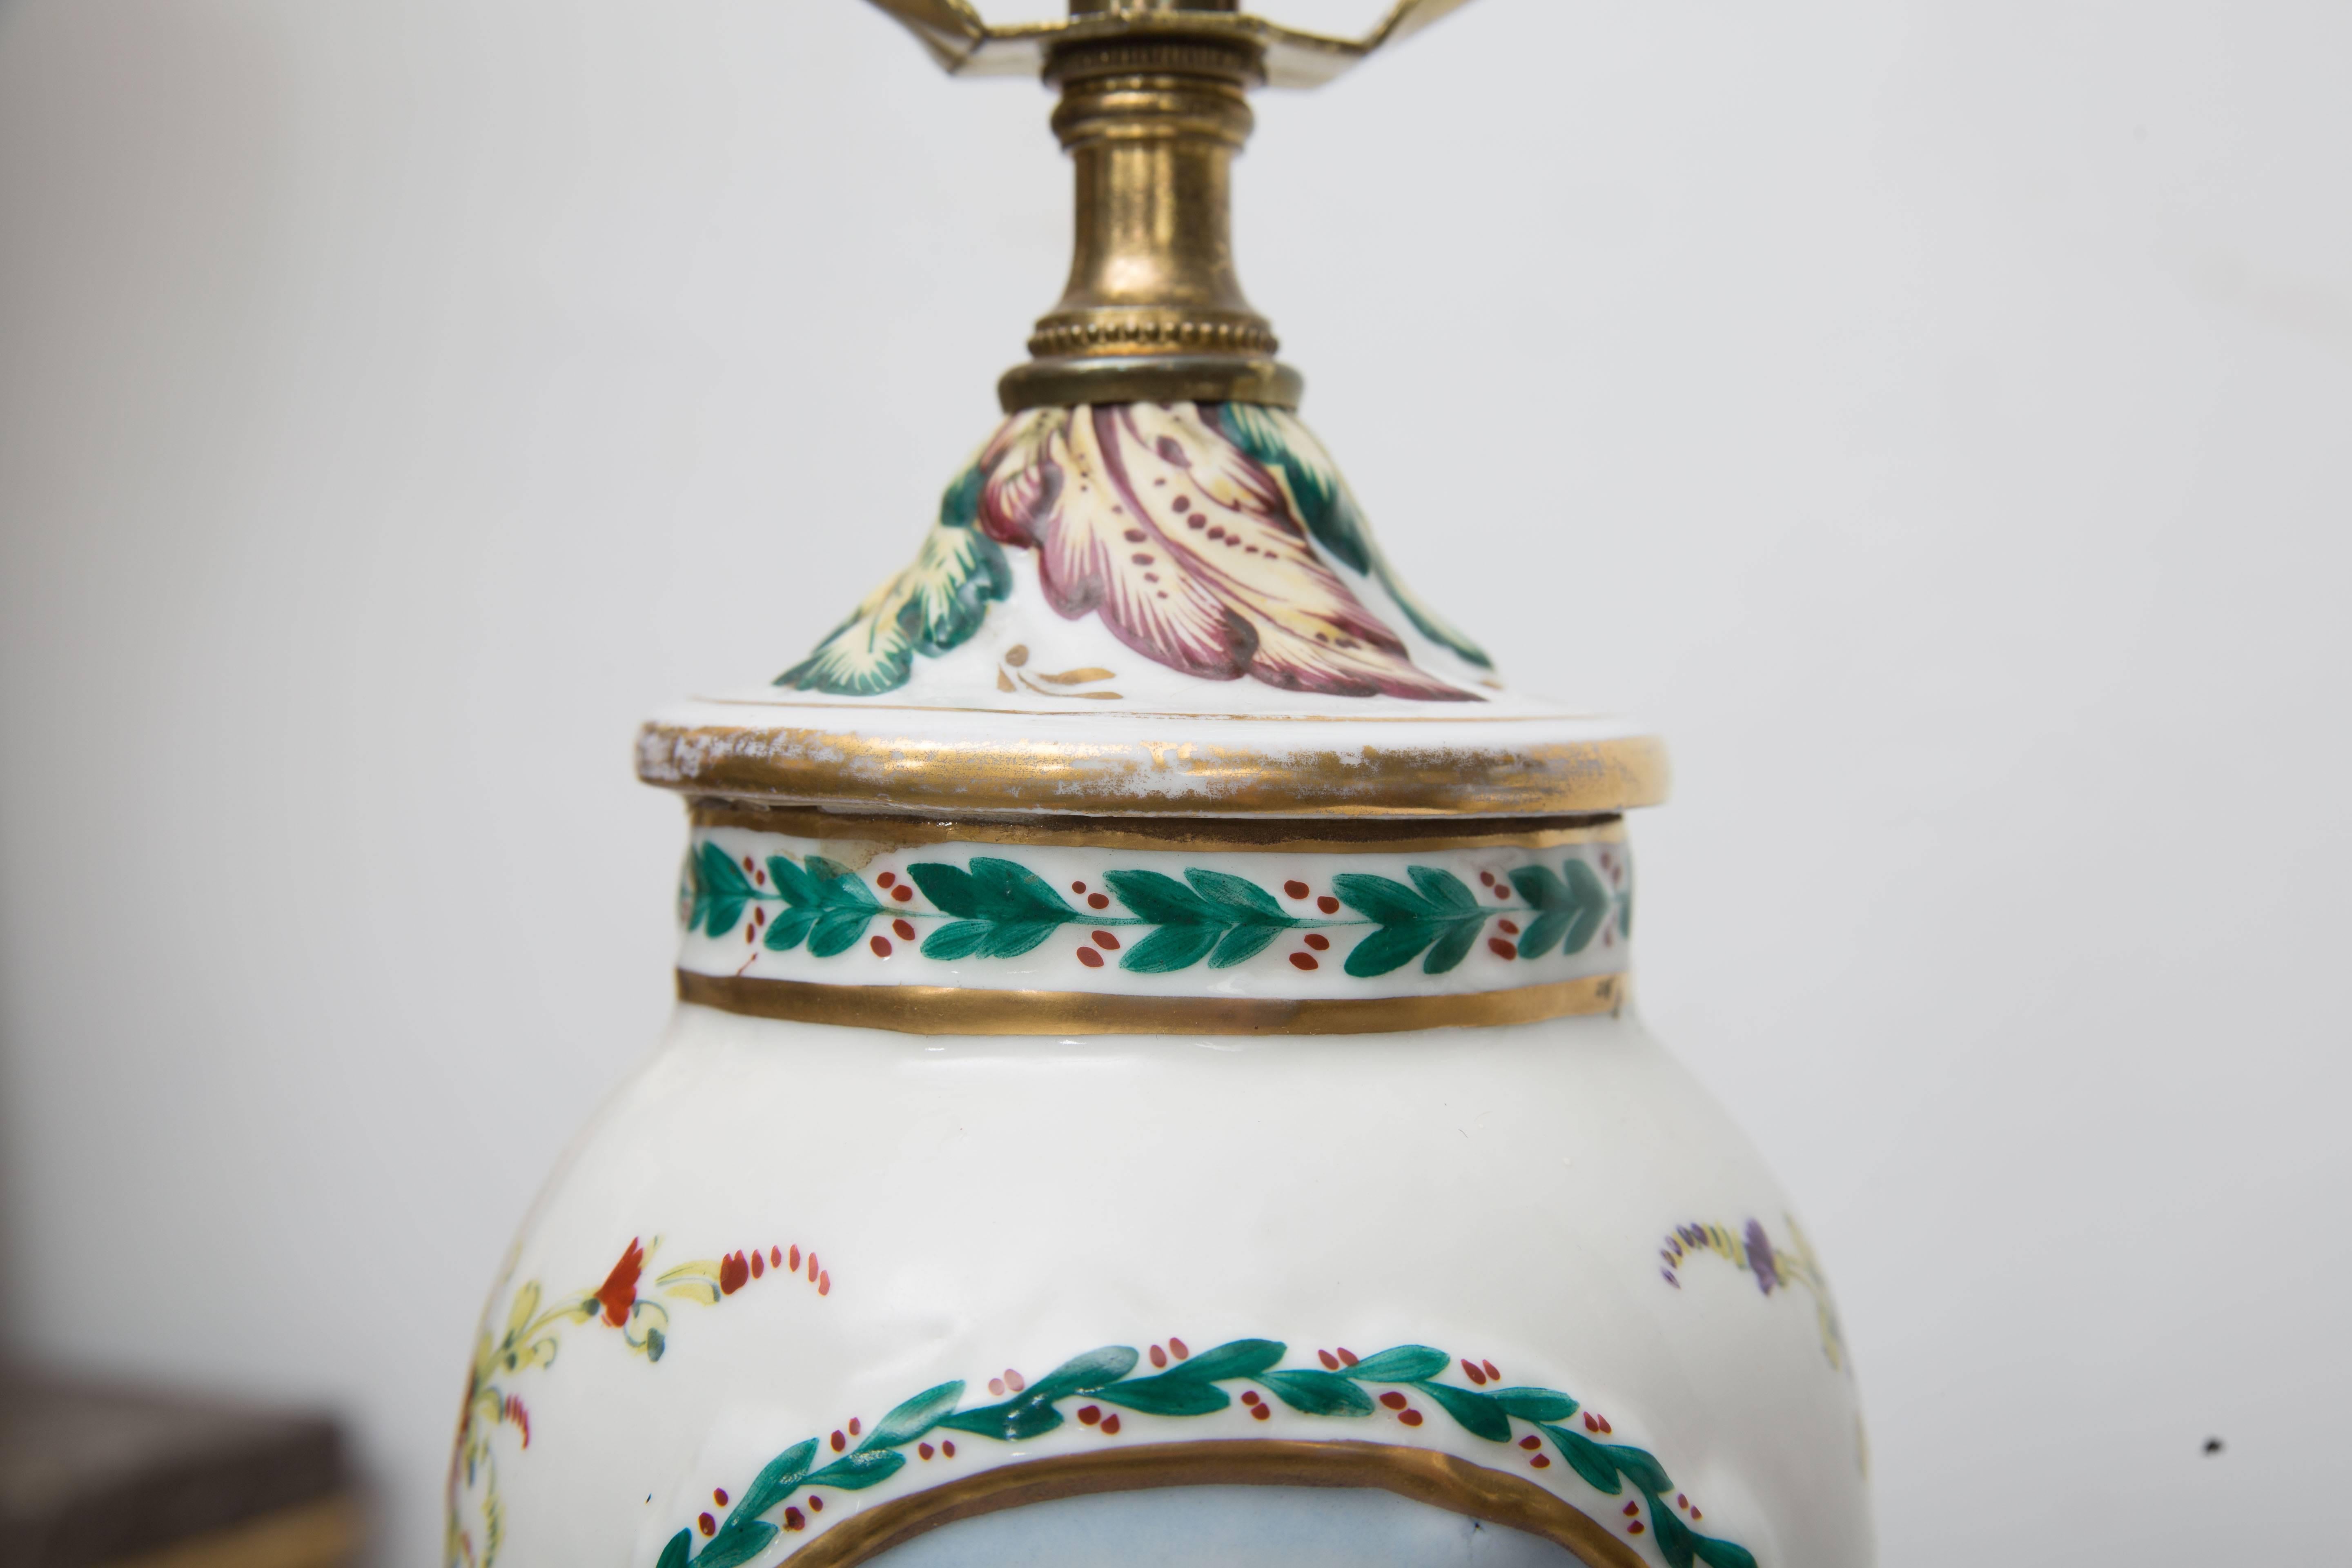 This delightful pair of porcelain Capodimonte vases have been converted to table lamps. The vases have a raised pattern and are hand-painted and mounted on a two-tier gold leaf plinth, circa 1900.